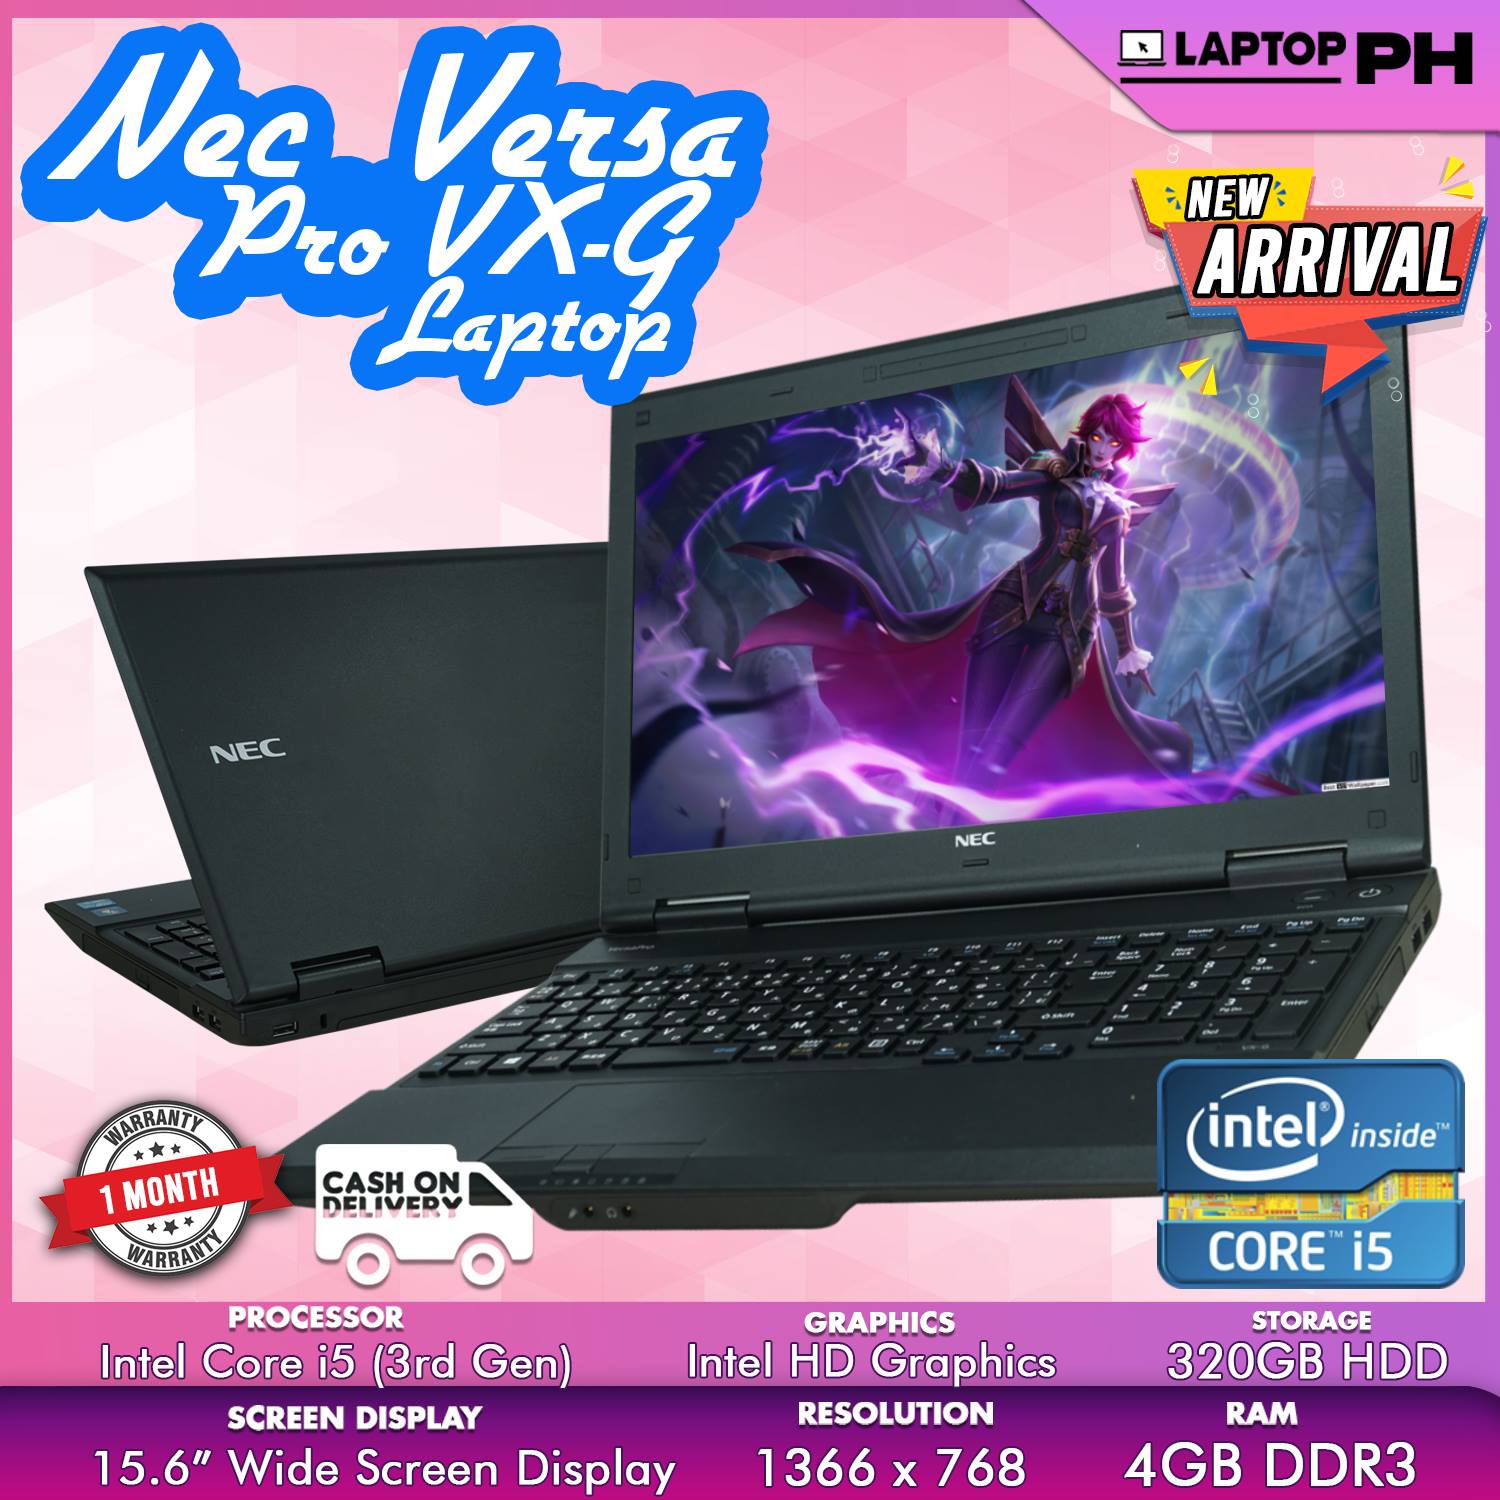 Nec Versapro Vx G Laptop Intel Core I5 3340m 4gb Ram Ddr3 3gb Hdd Free Bag And Charger We Also Have Monitor Laptop Desktop Computer Gaming Pc Cpu I3 I5